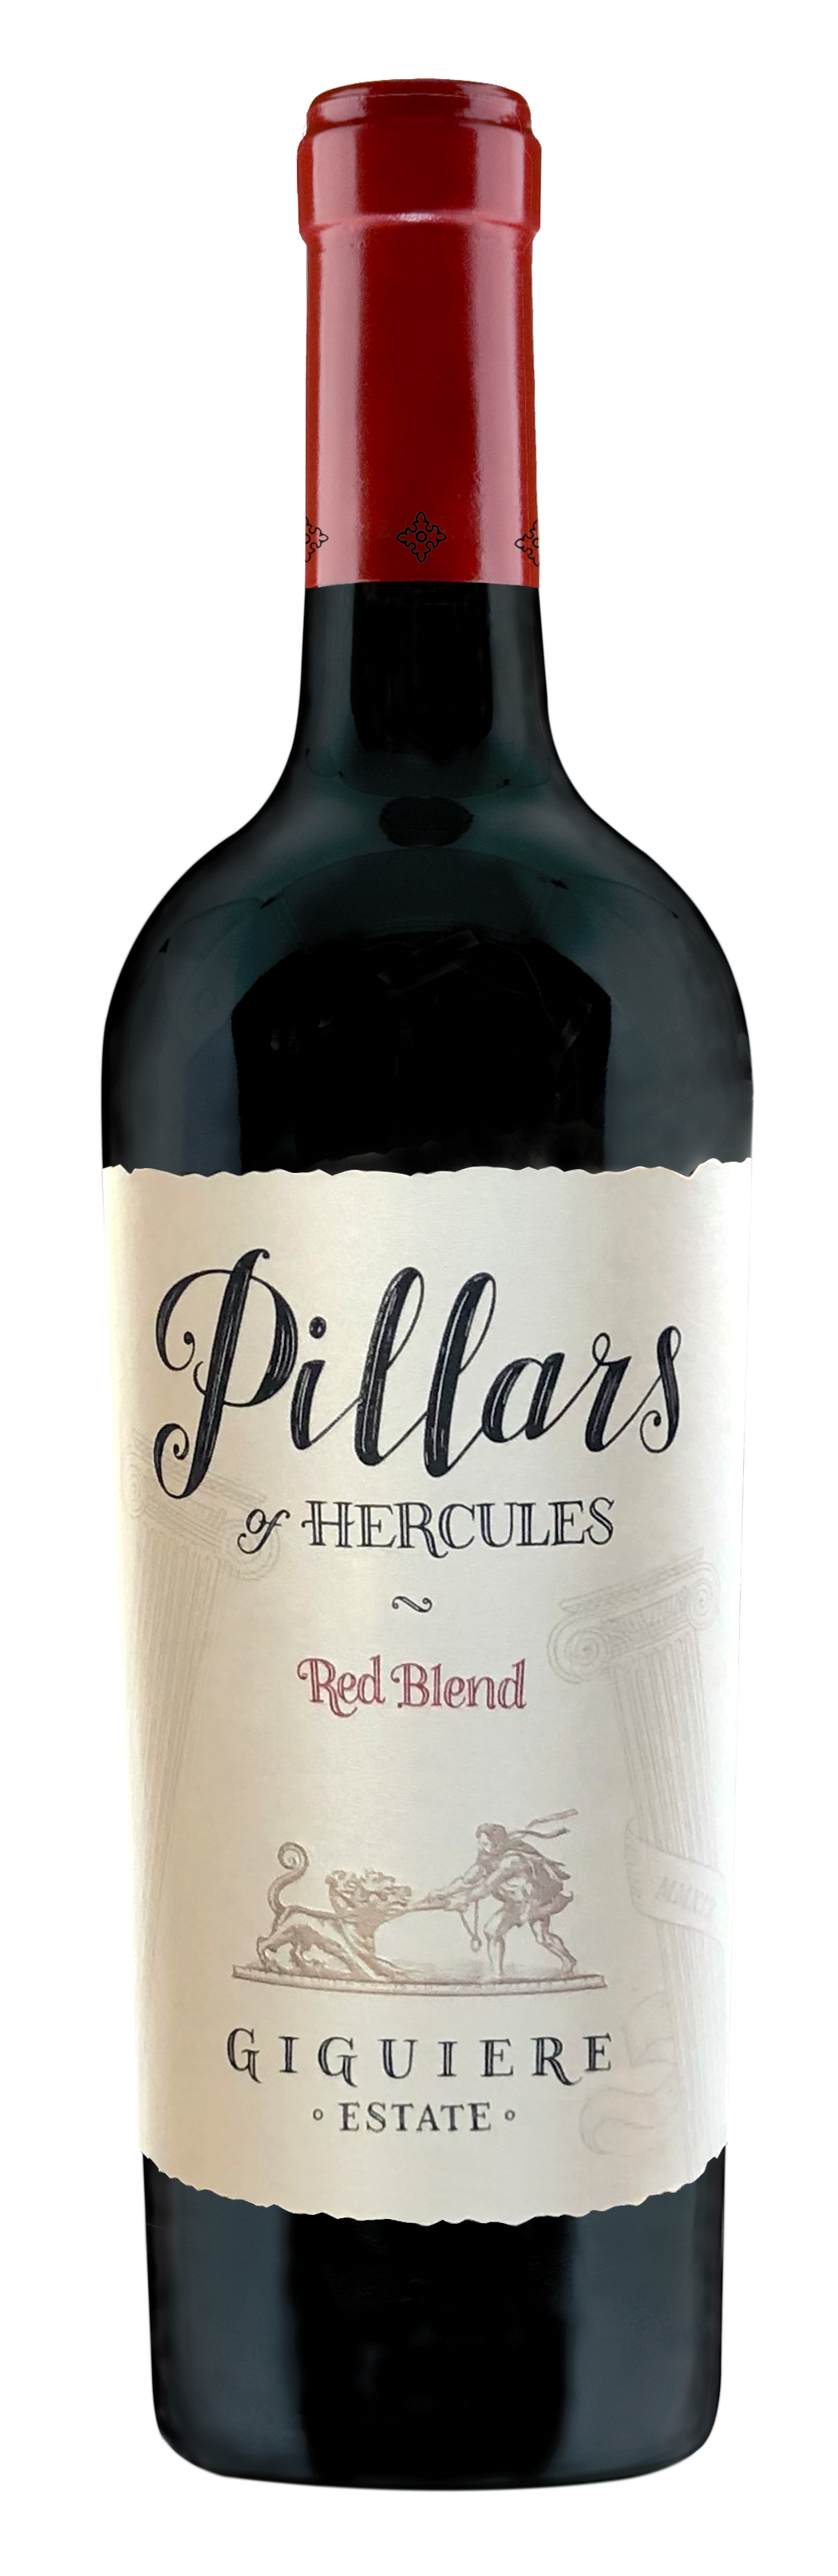 Product Image for 2020 Pillars of Hercules Red Blend, Giguiere Estate